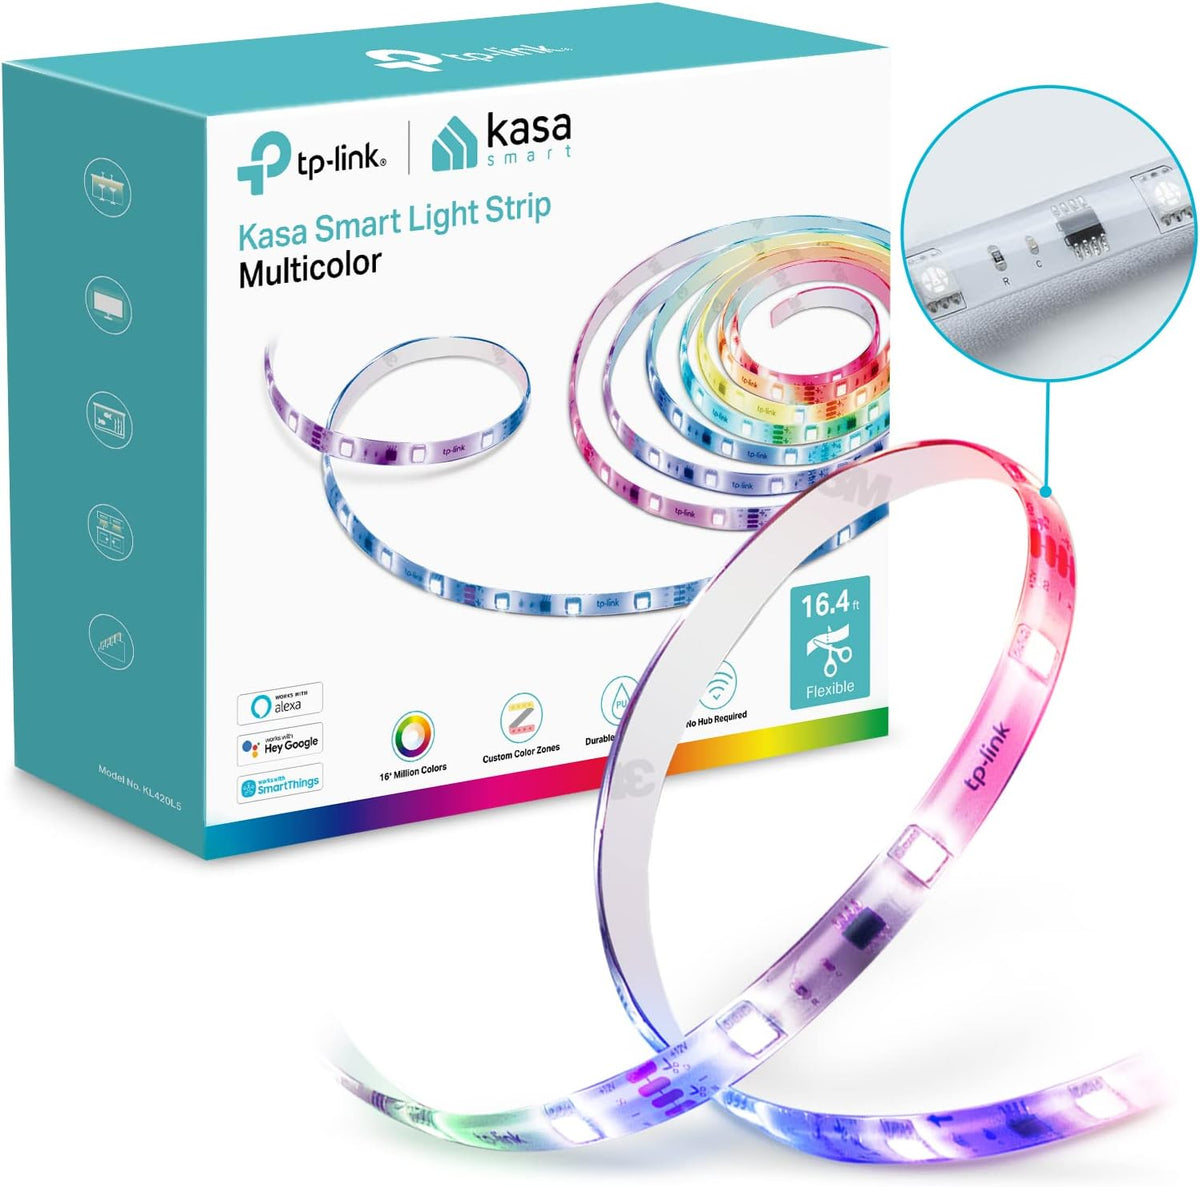 Kasa Smart LED Light Strip, 50 Color Zones RGBIC, 16.4ft Wi-Fi LED Strip Works w/ Alexa, Google Home & SmartThings, High Brightness, 16M Colors, PU Coating, Trimmable, 2 Yr Warranty (KL420L5)